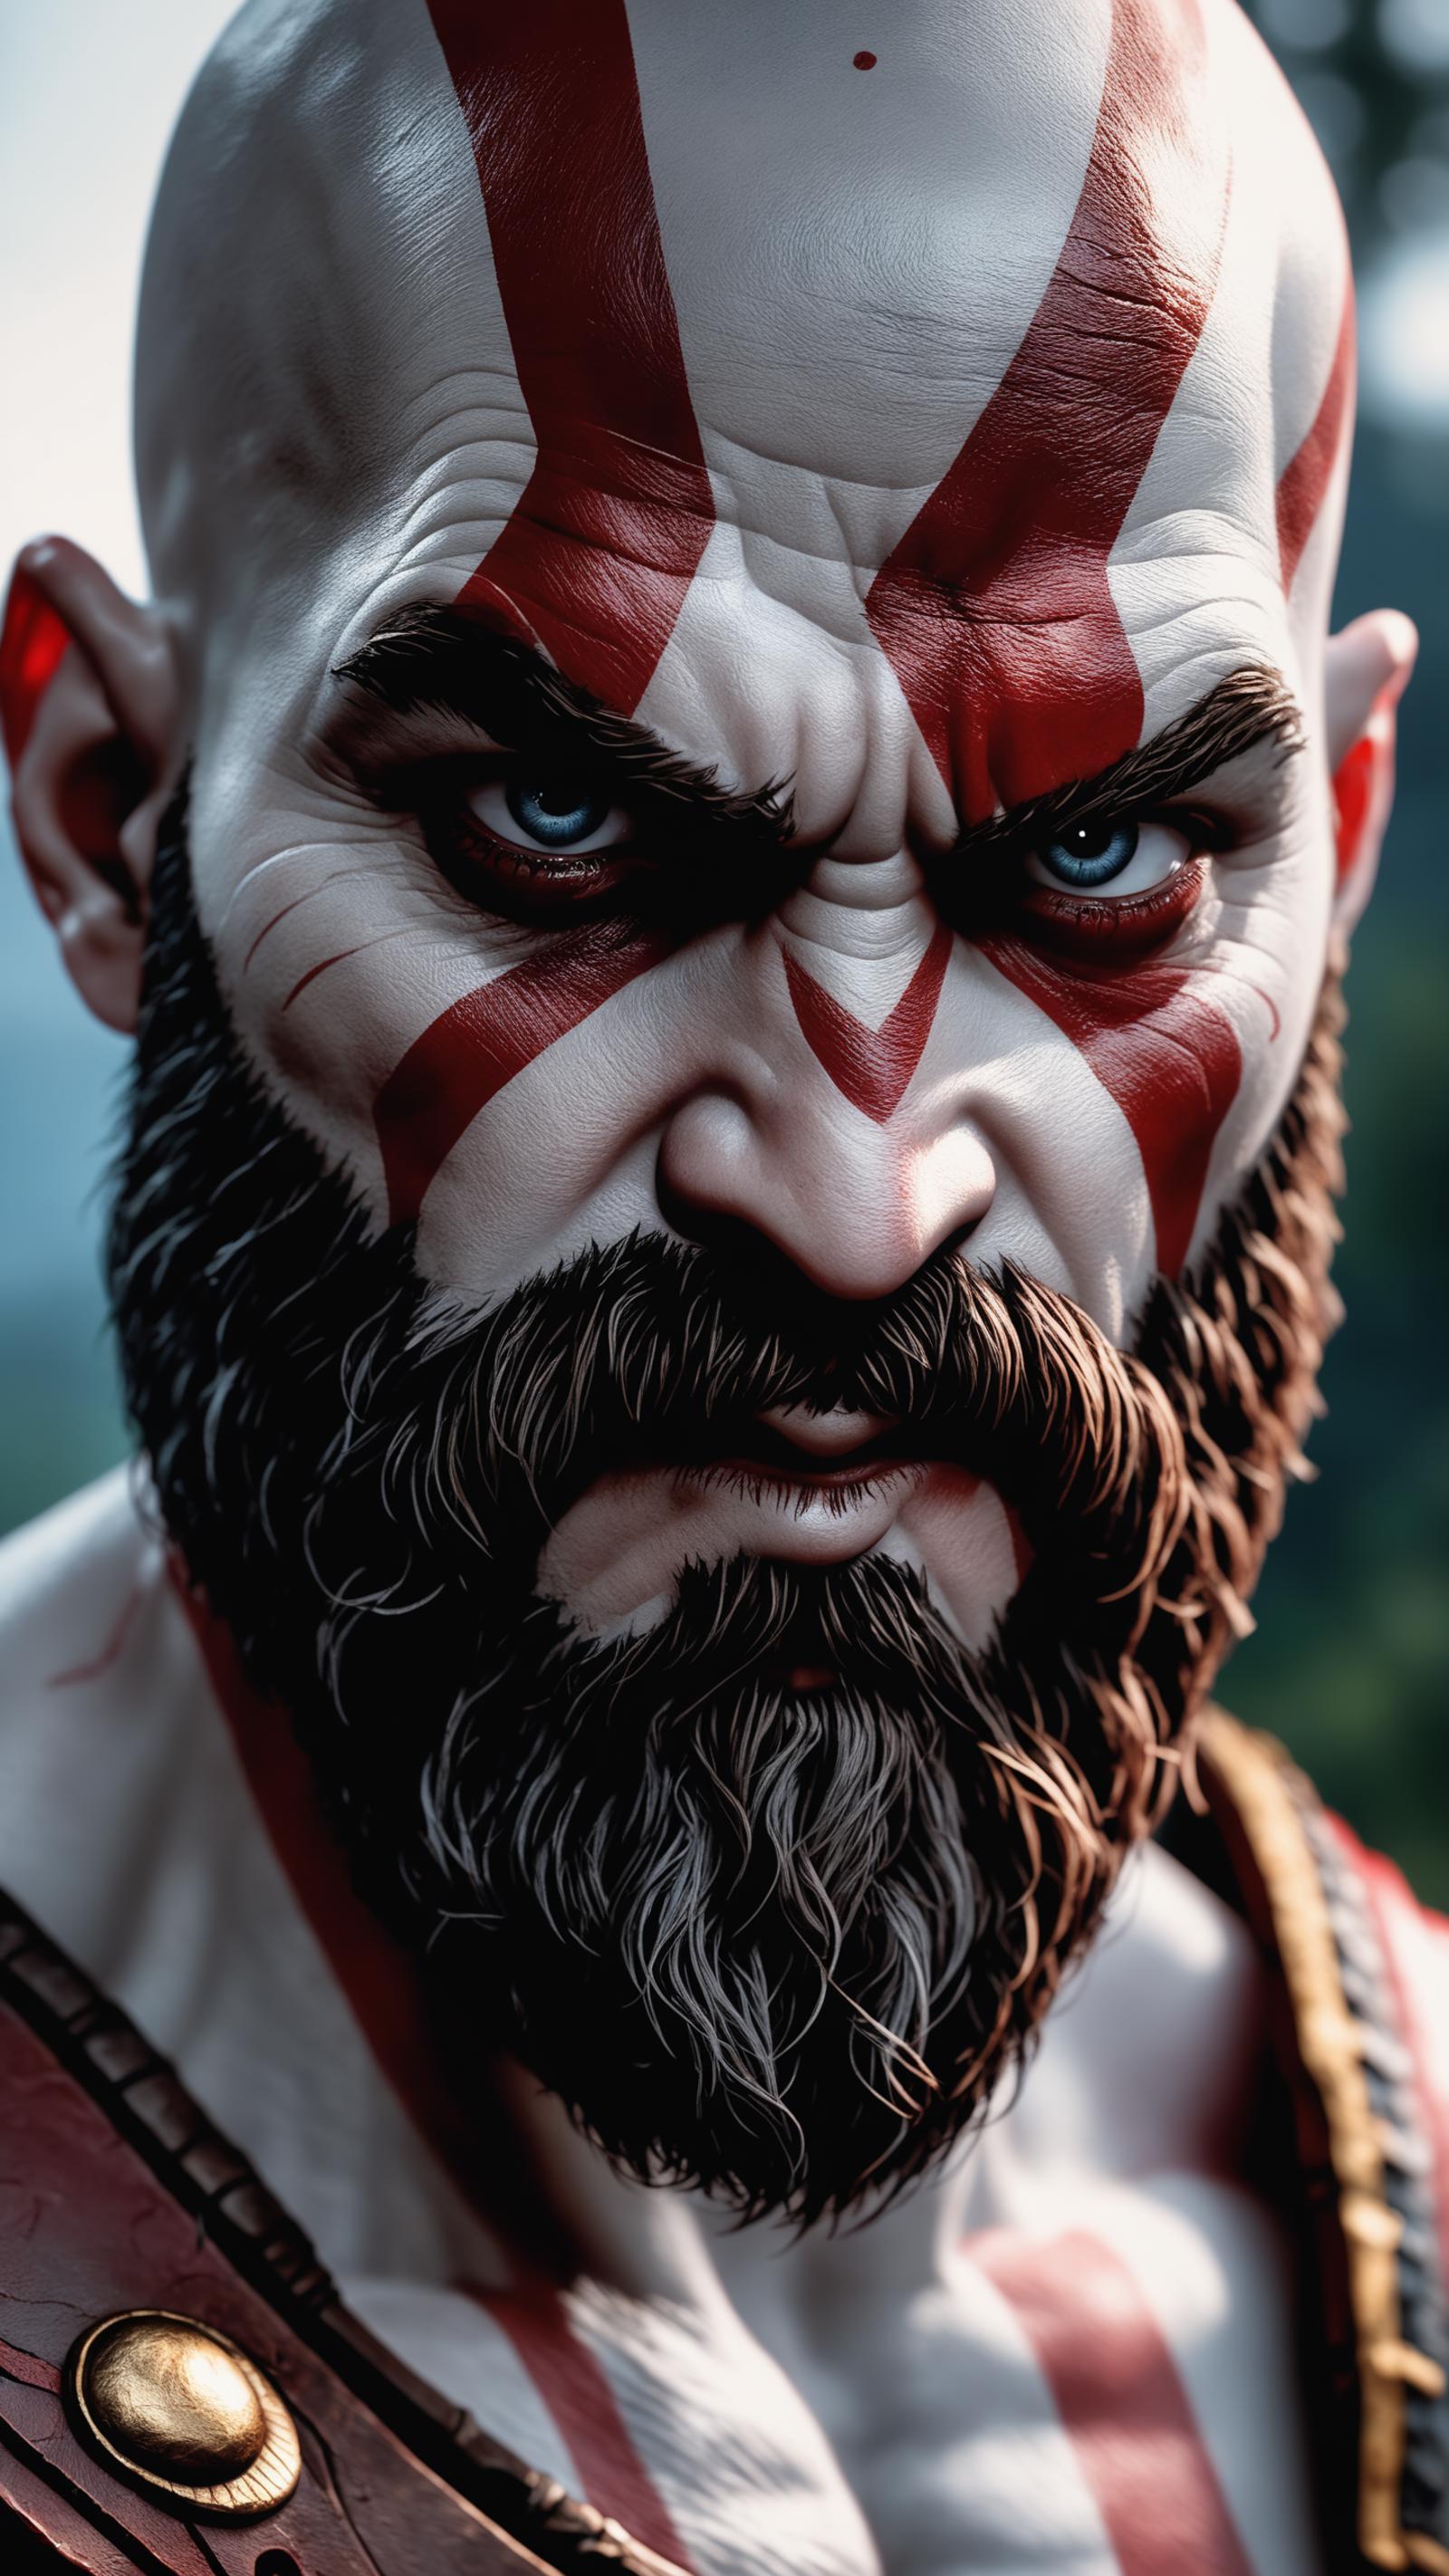 A close-up of a man with a beard and red and white facial paint, showing his intense expression.